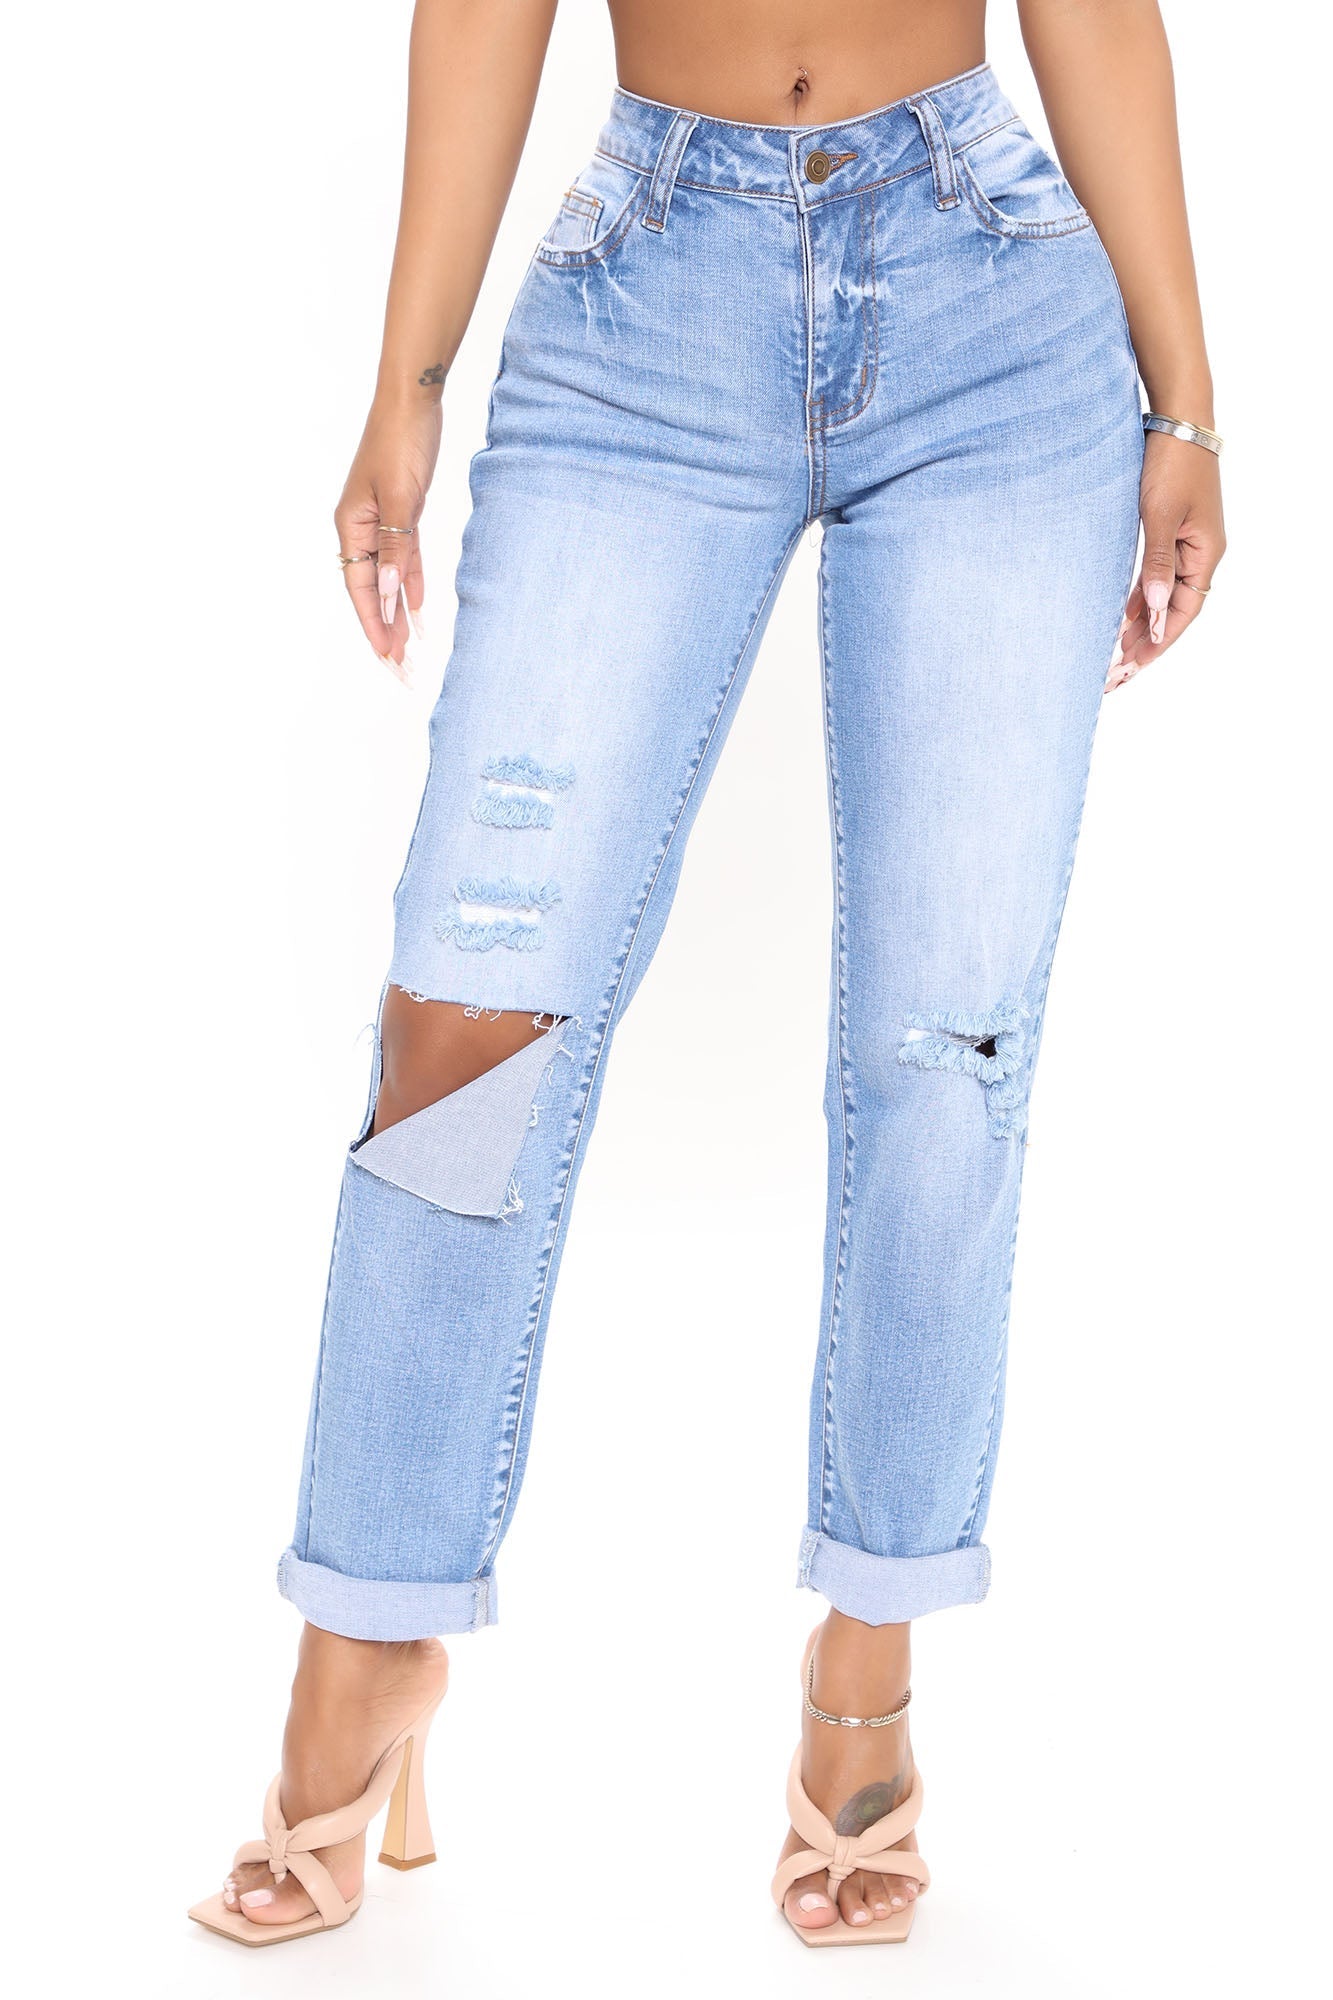 On My Own Ripped Girlfriend Jeans - Medium Blue Wash